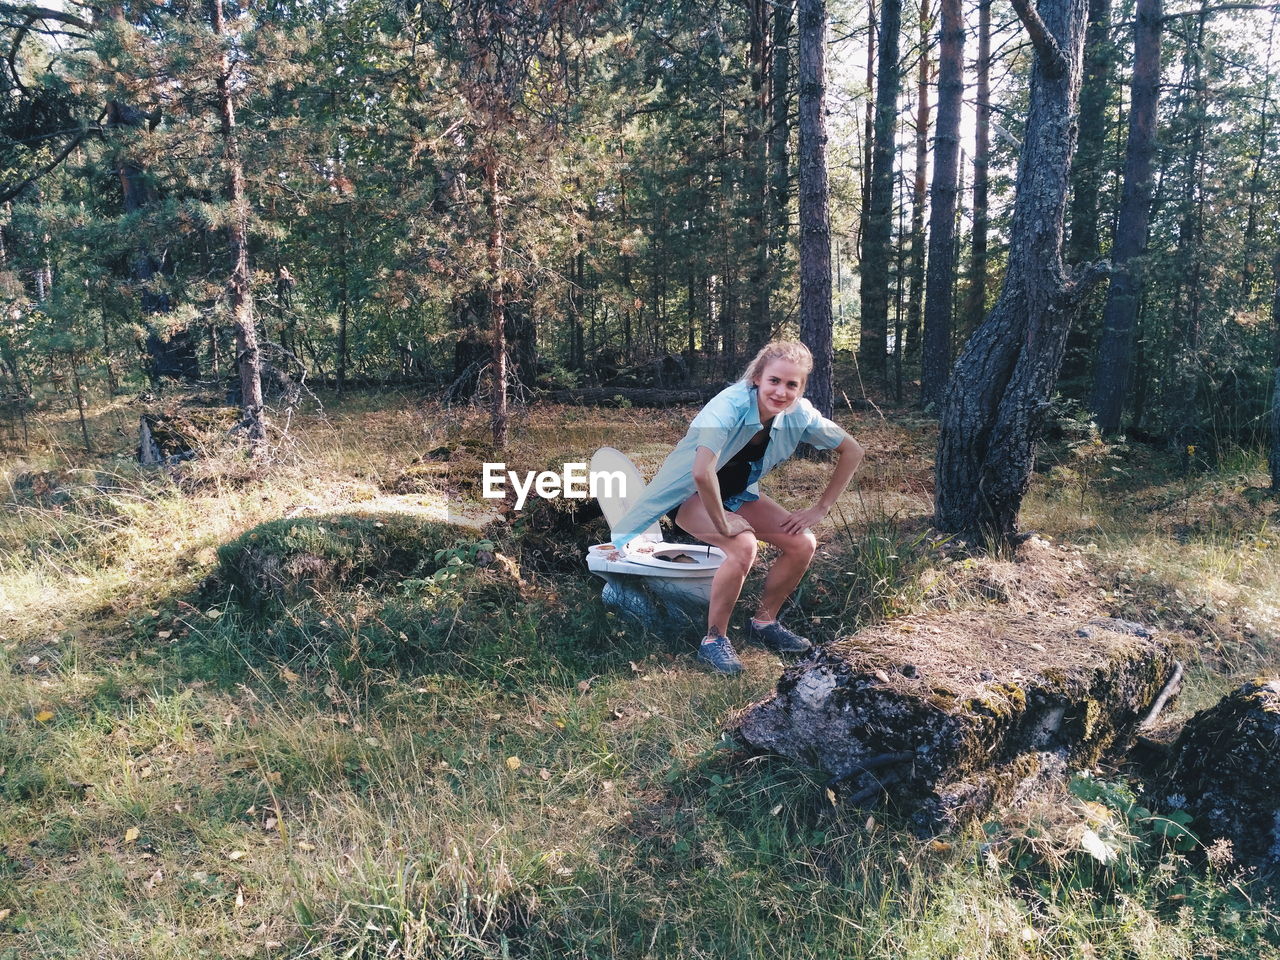 Woman in chair position over abandoned toilet seat in forest